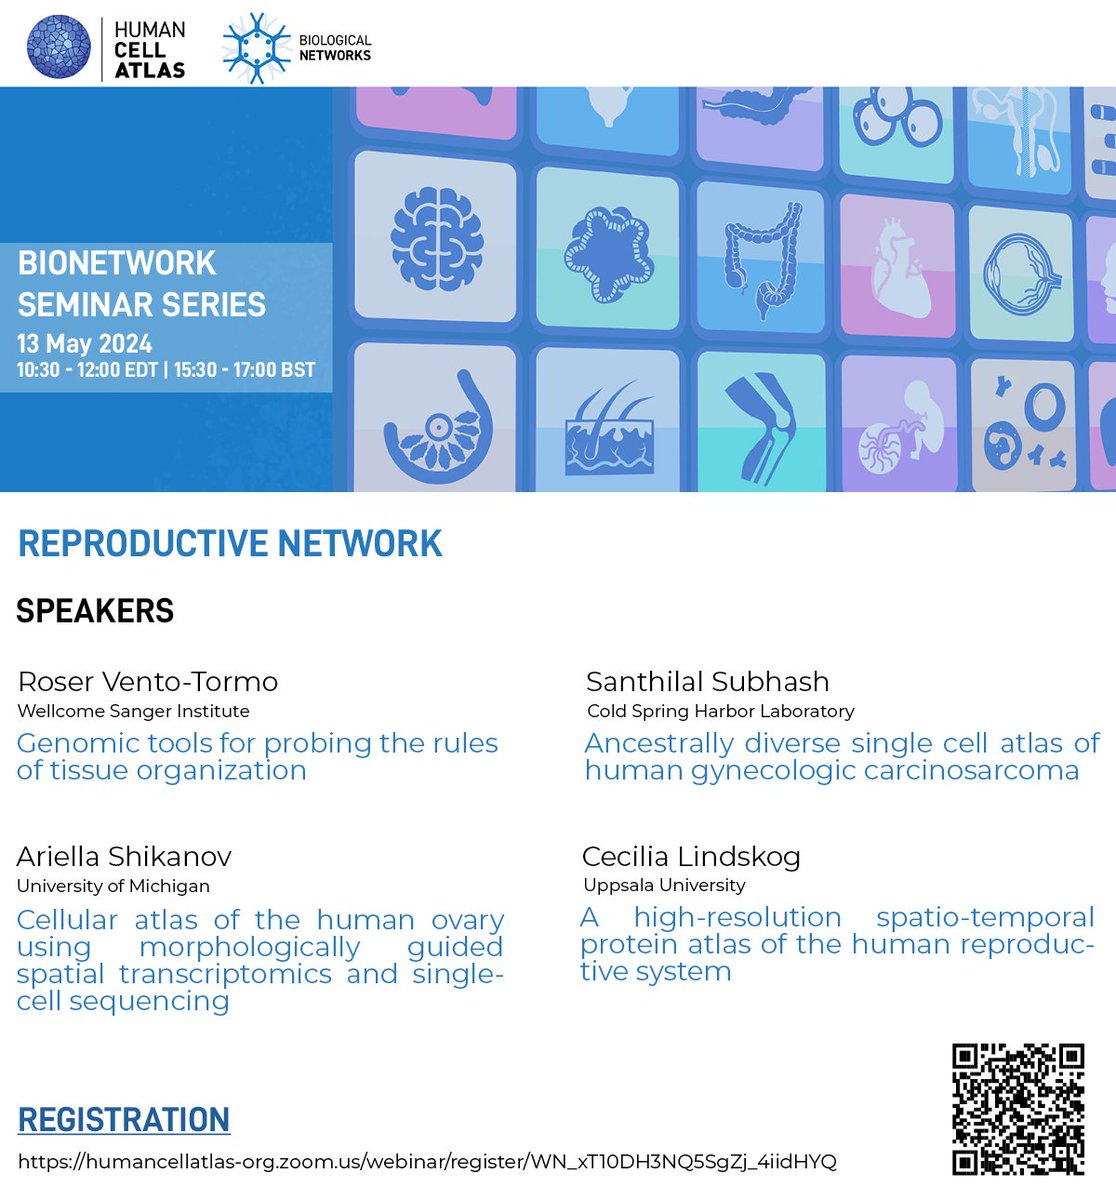 Remember today's HCA Biological Network Seminar will feature the Reproduction Bionetwork. Please join us at 10:30-12:00 EDT / 15:30-17:00 BST, 13 May. You can register at: humancellatlas-org.zoom.us/webinar/regist…